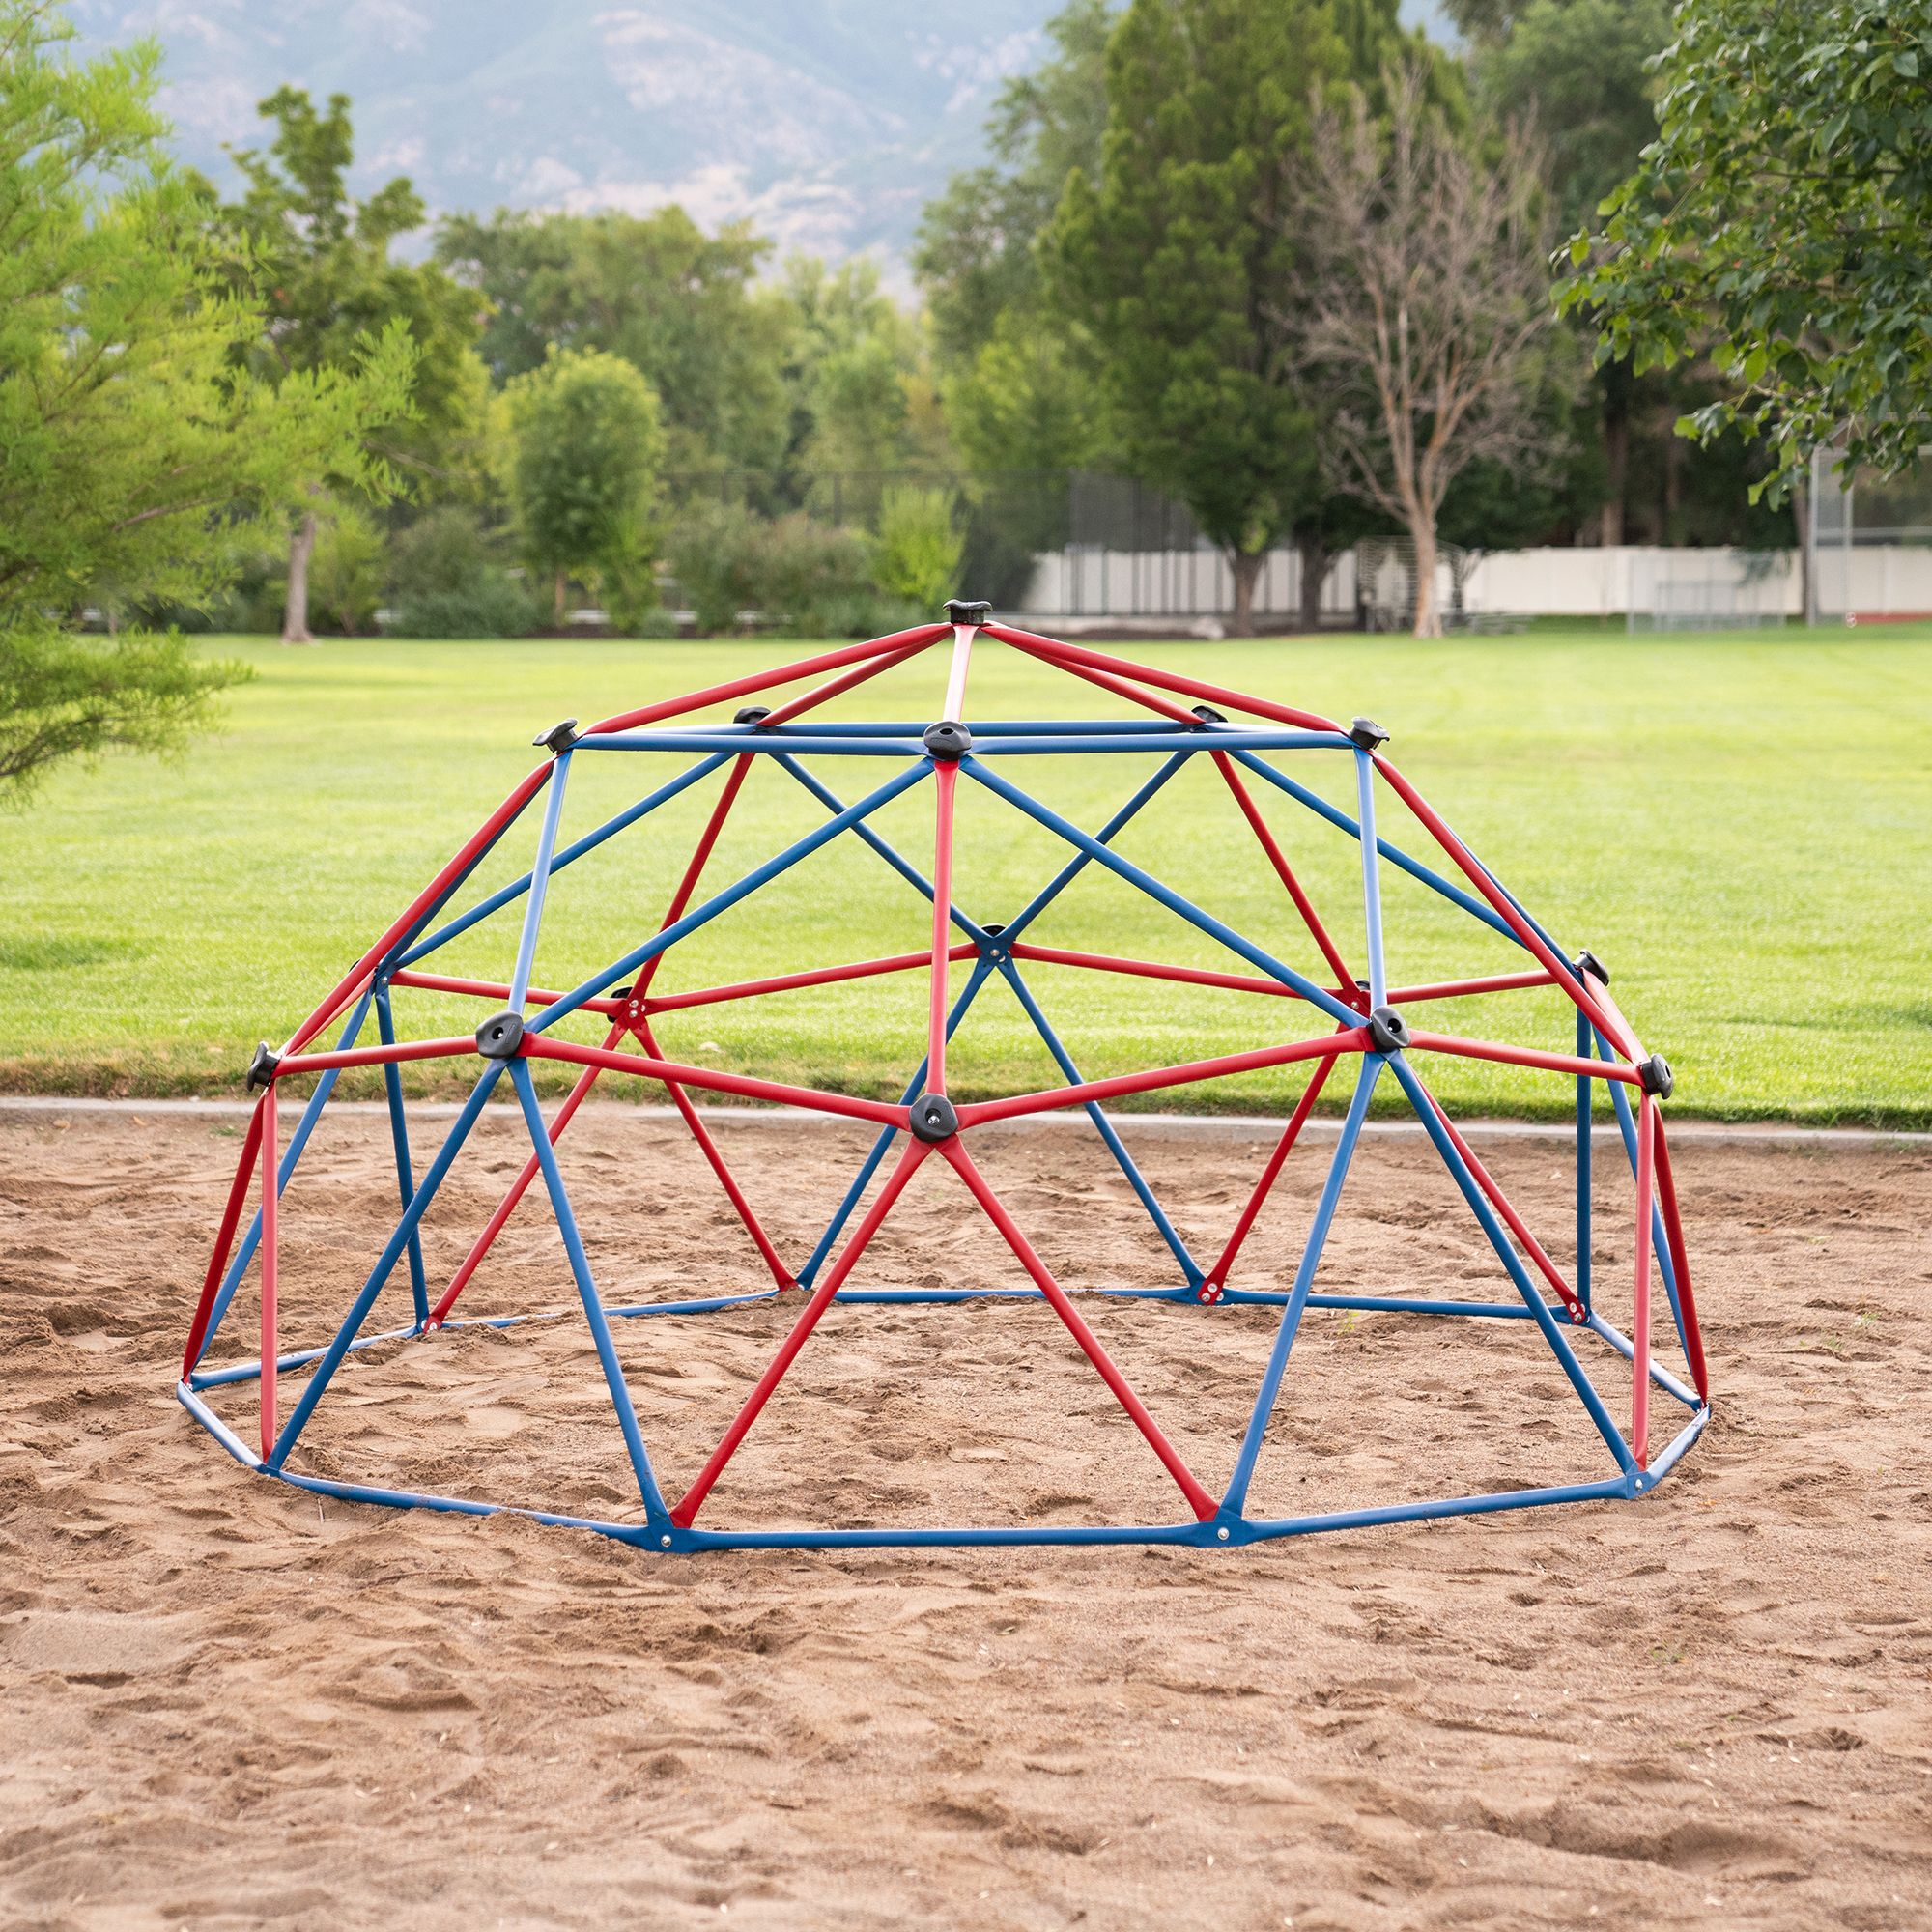 Lifetime Kid's Outdoor 5 ft. H x 10 ft. W Dome Climber, Red and Blue (101301) - image 4 of 11